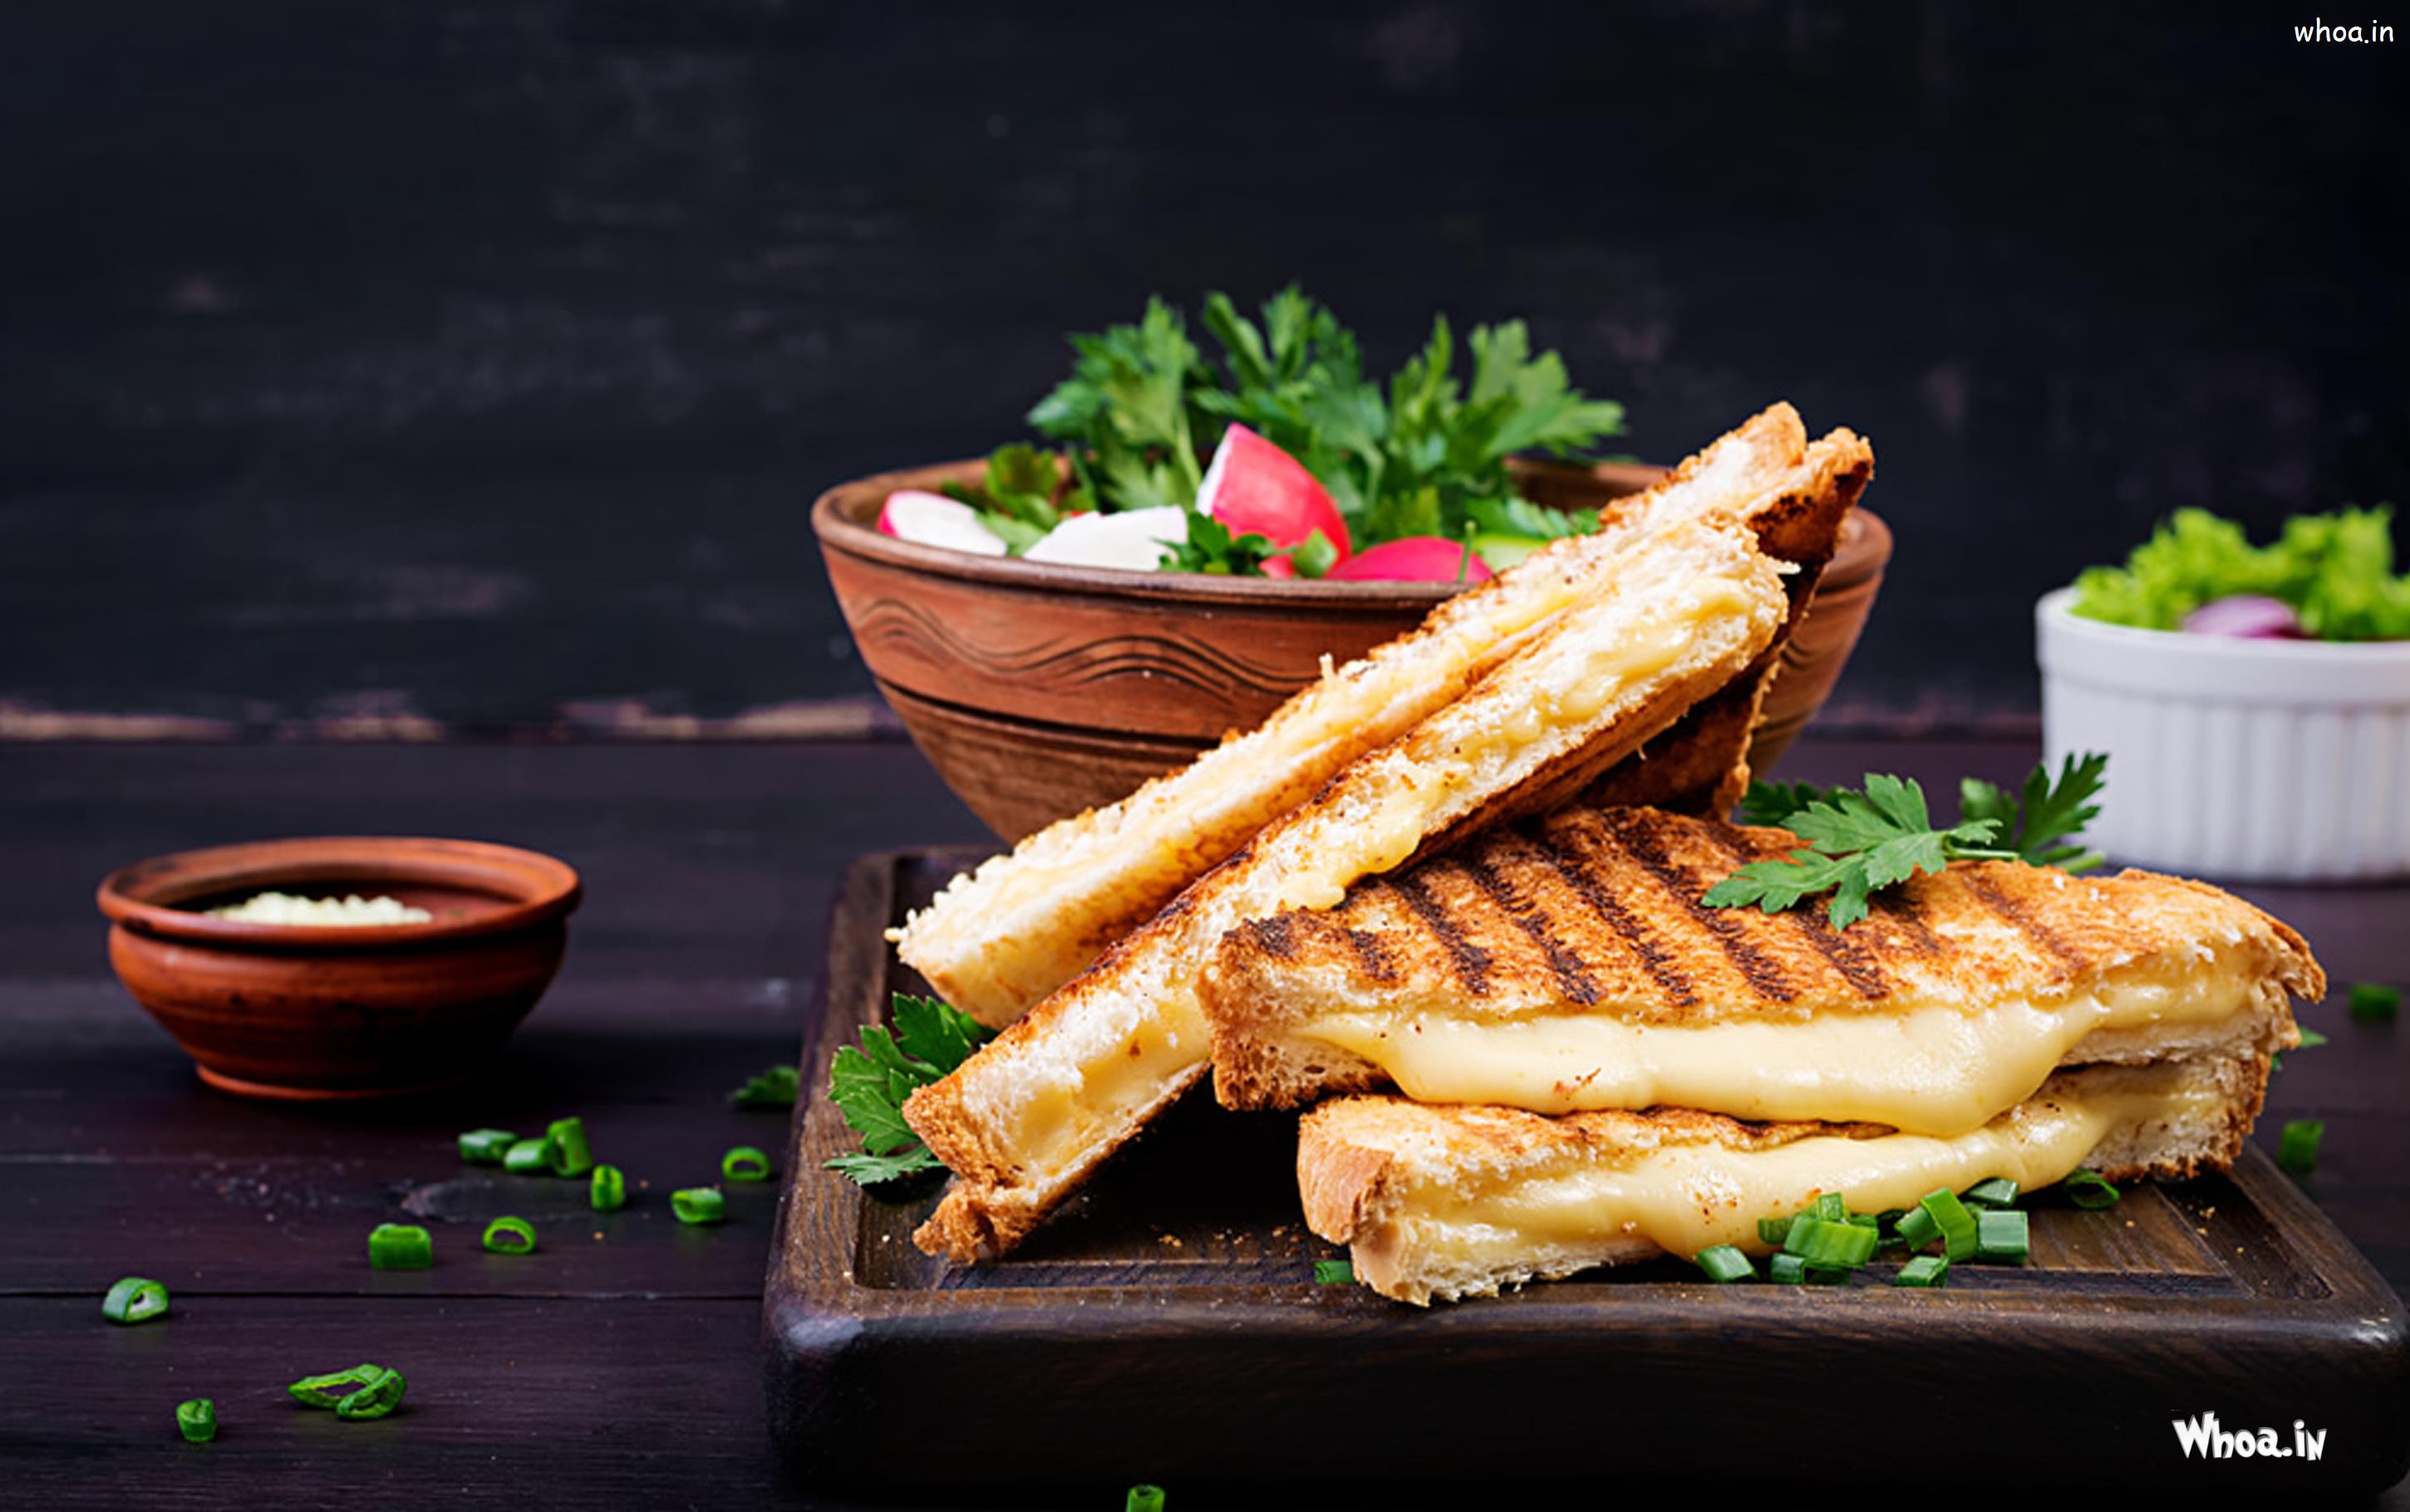 Best Grilled Sandwich Pictures, Images And Photos For Free